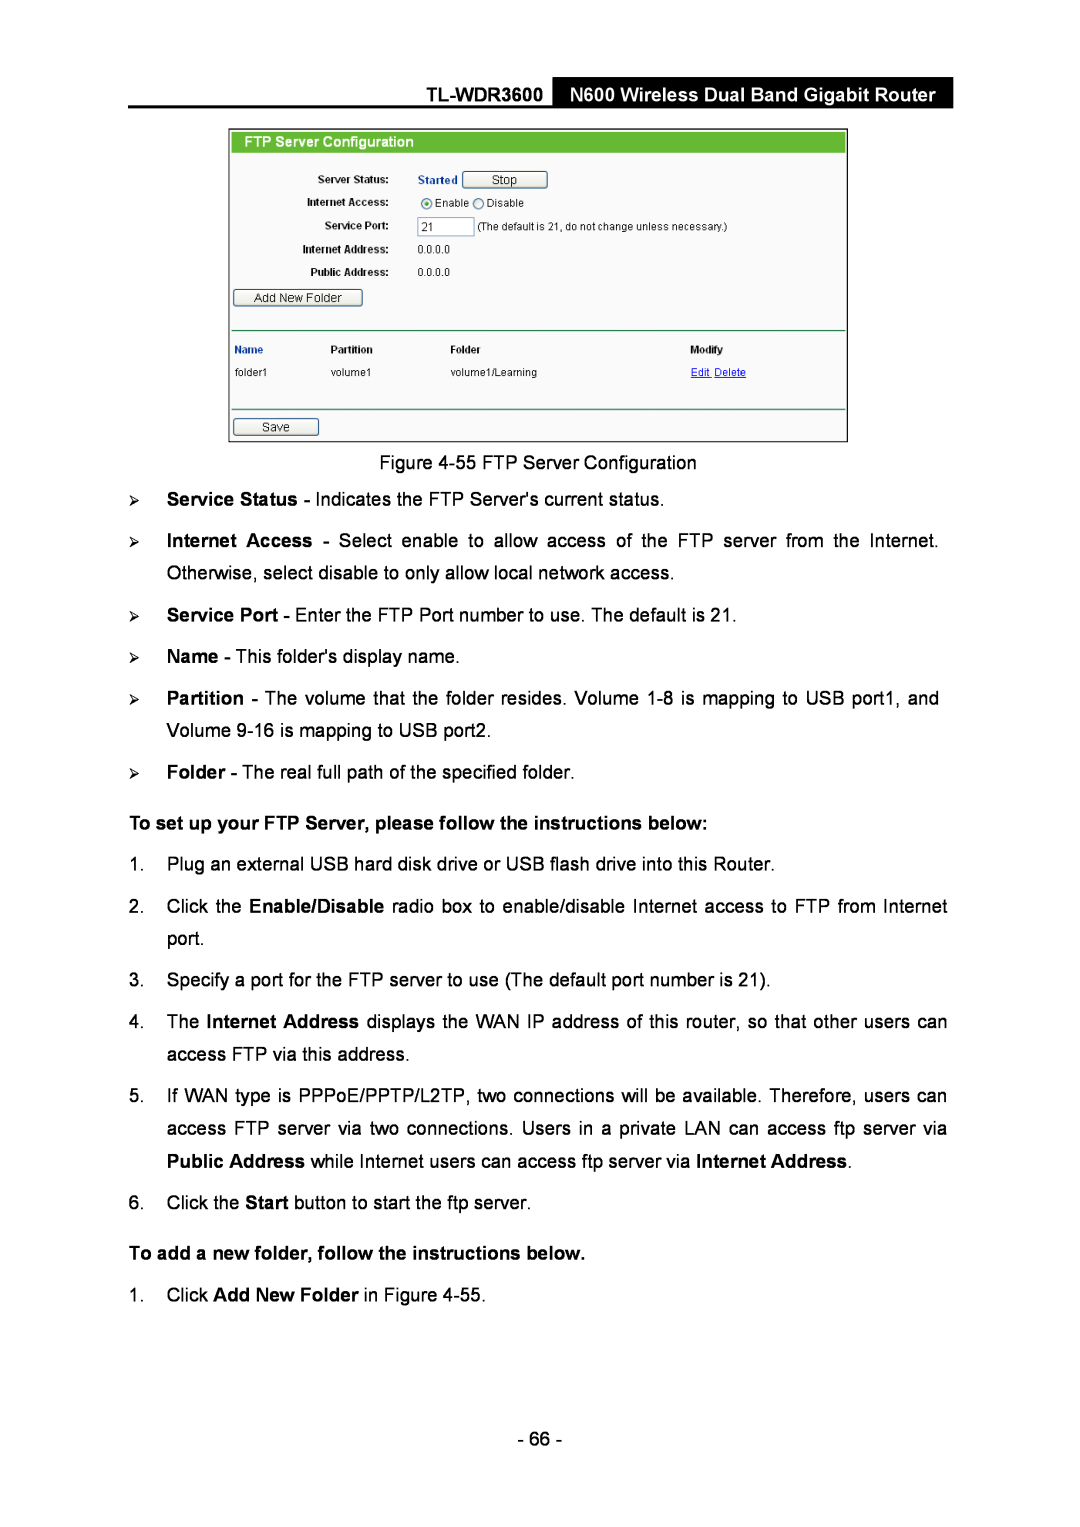 TP-Link TL-WDR3600 manual To set up your FTP Server, please follow the instructions below 